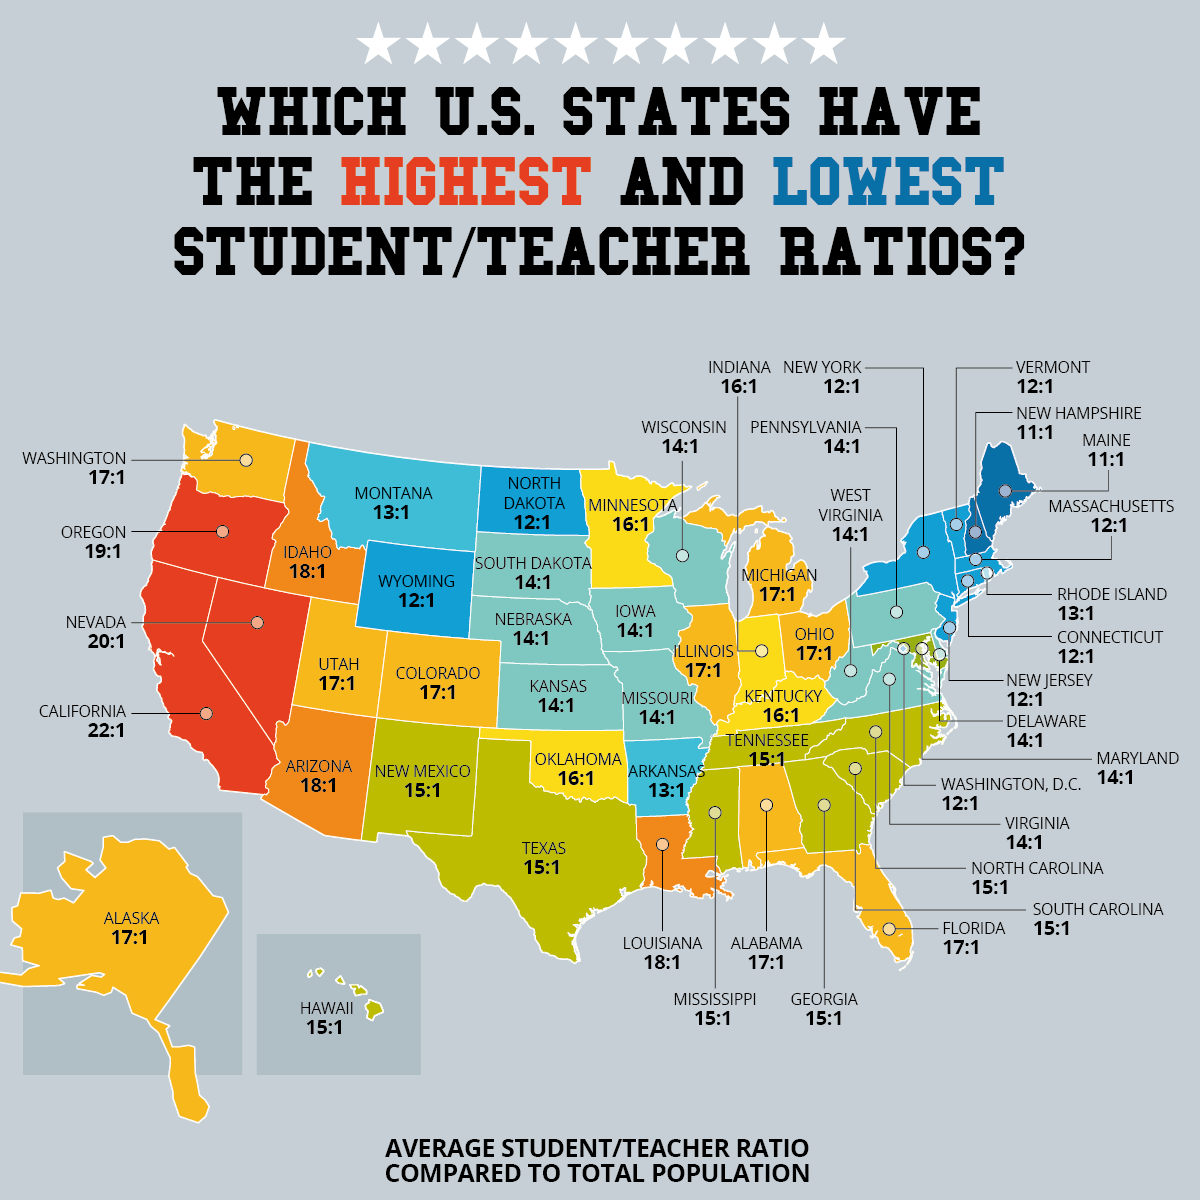 Which U.S. States Have the Highest and Lowest Student/Teacher Ratios